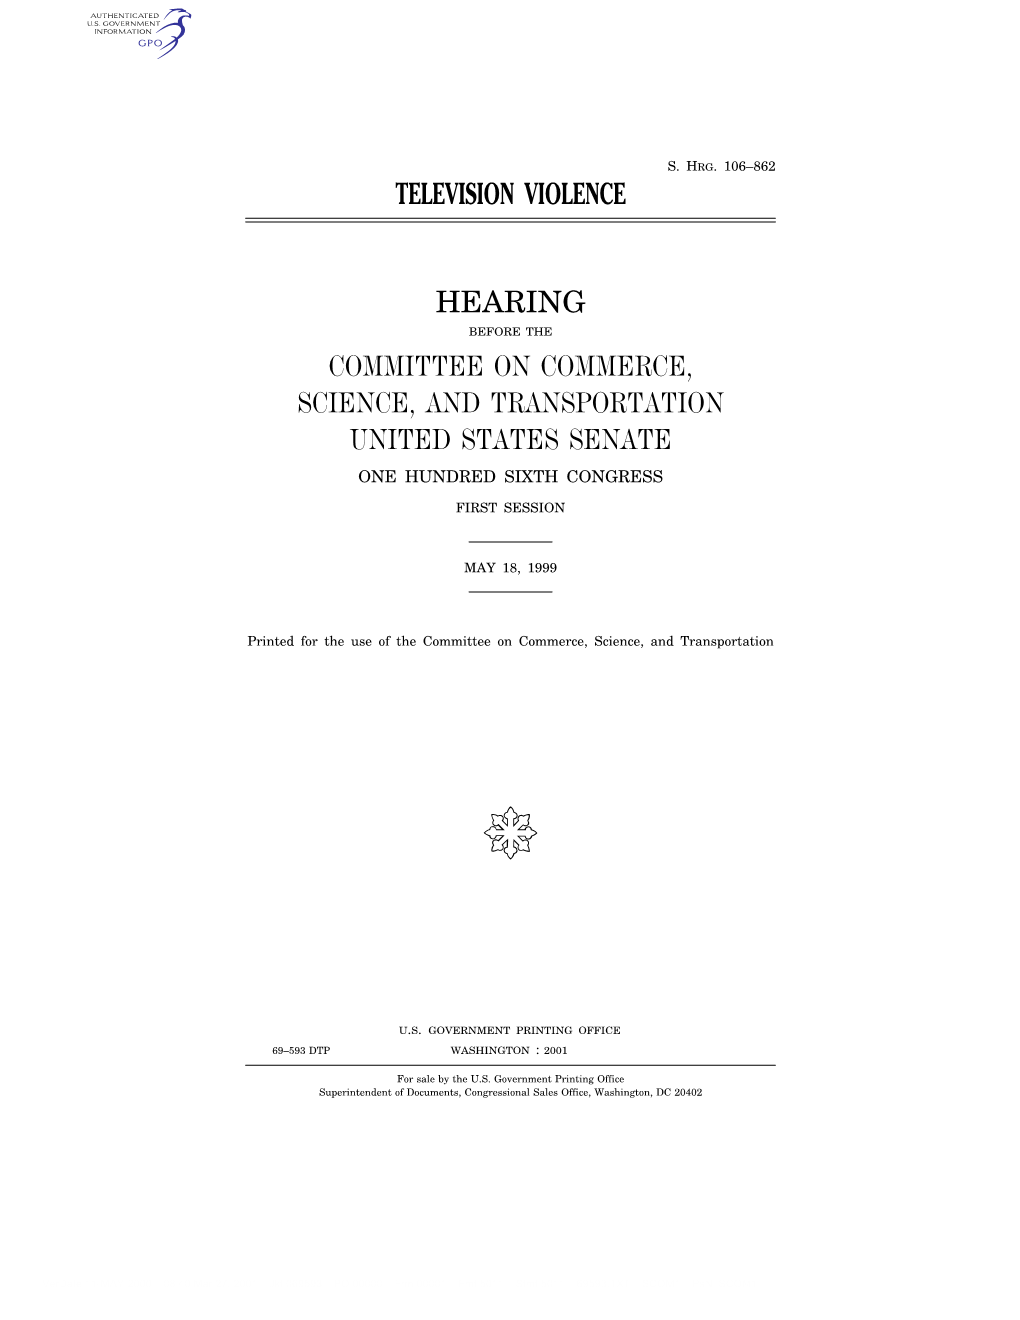 Television Violence Hearing Committee on Commerce